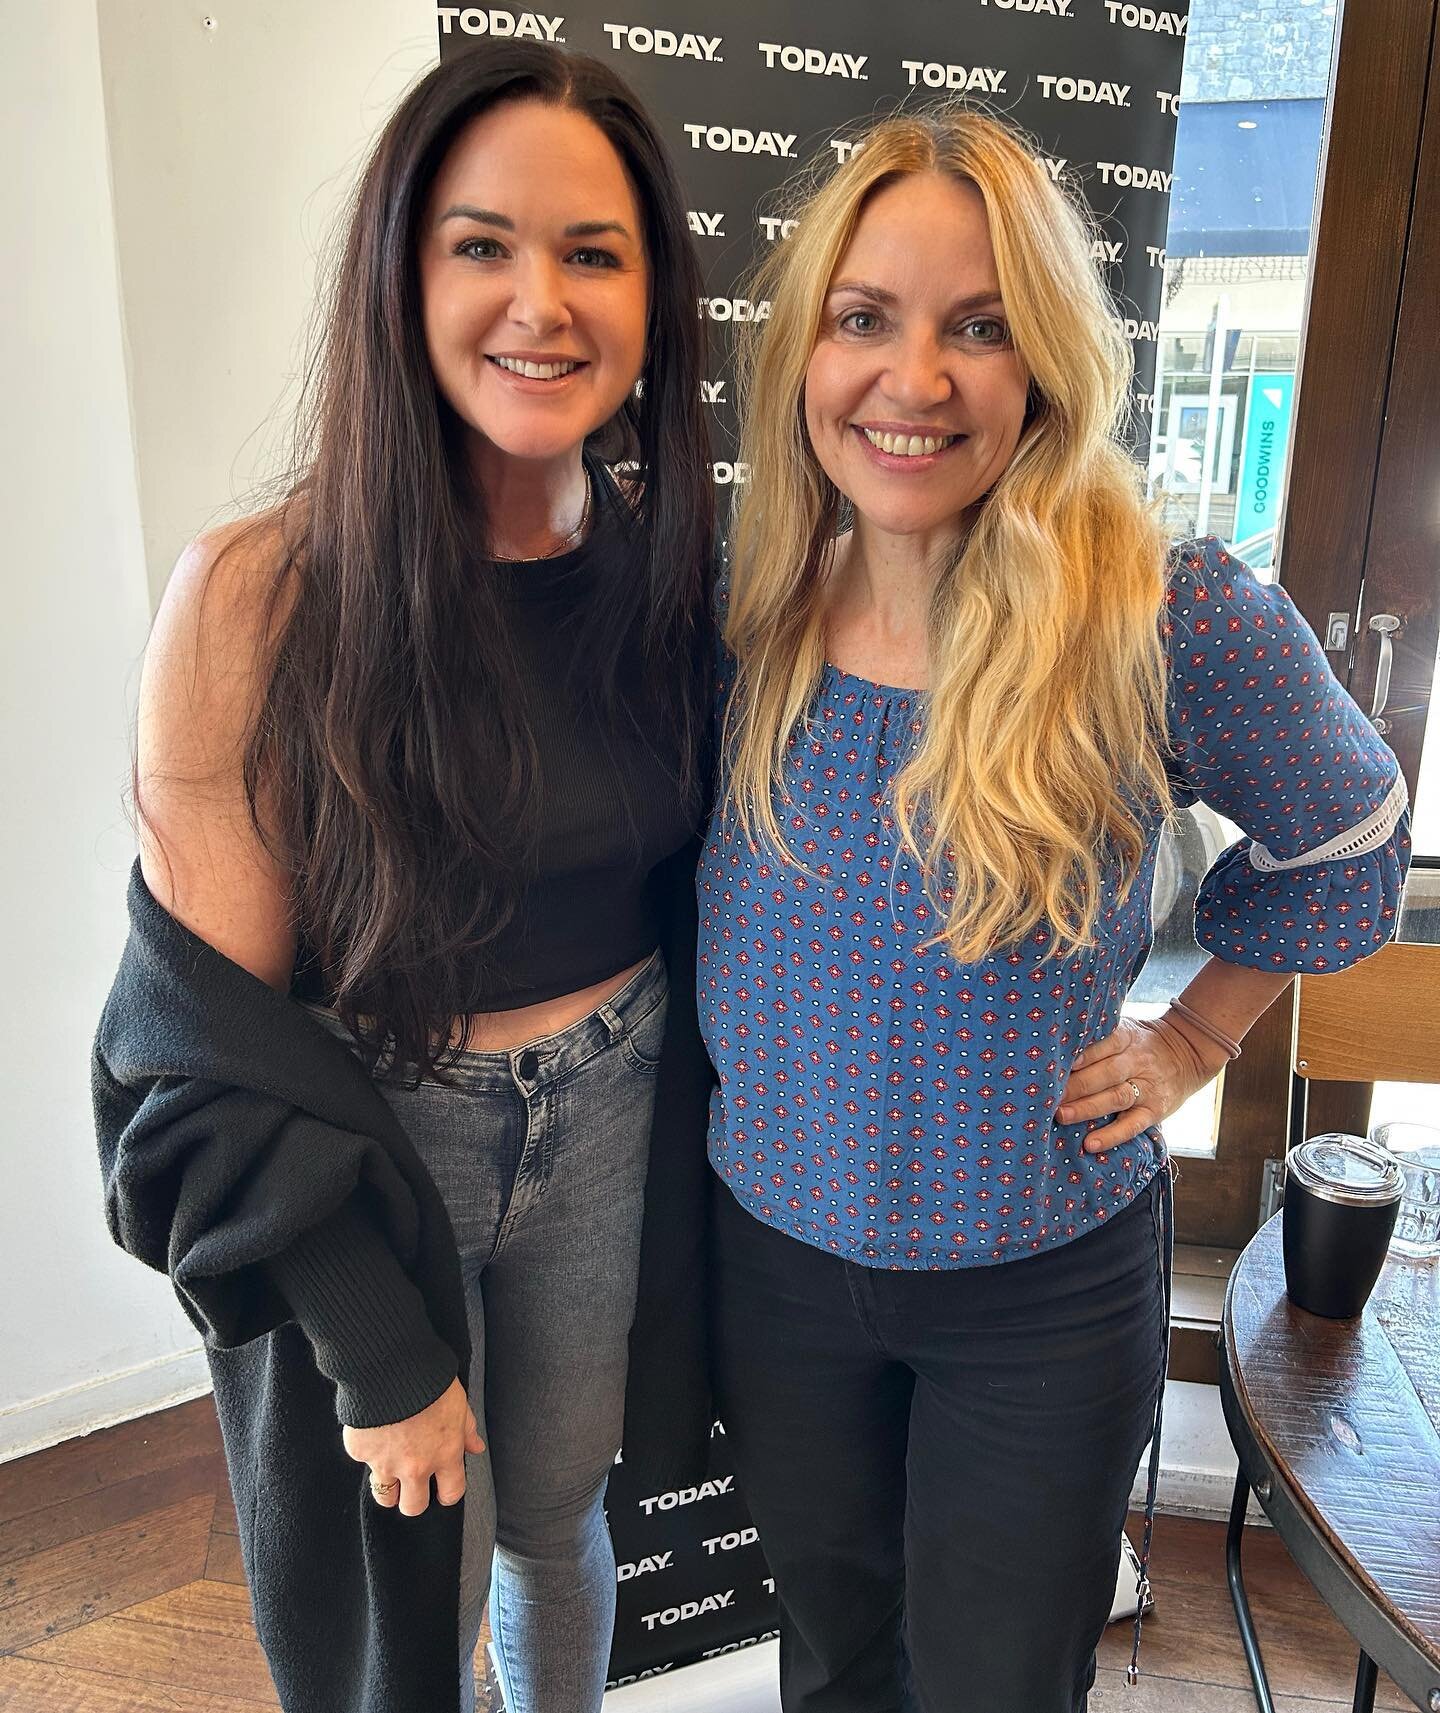 Had a great on air catch up with this mega GB this morning! Spent so much time chatting both on and off air with Mel, Craig, Shelley and Mikey that I have no idea what actually made it out on the airwaves. But it was open and honest about love, grief